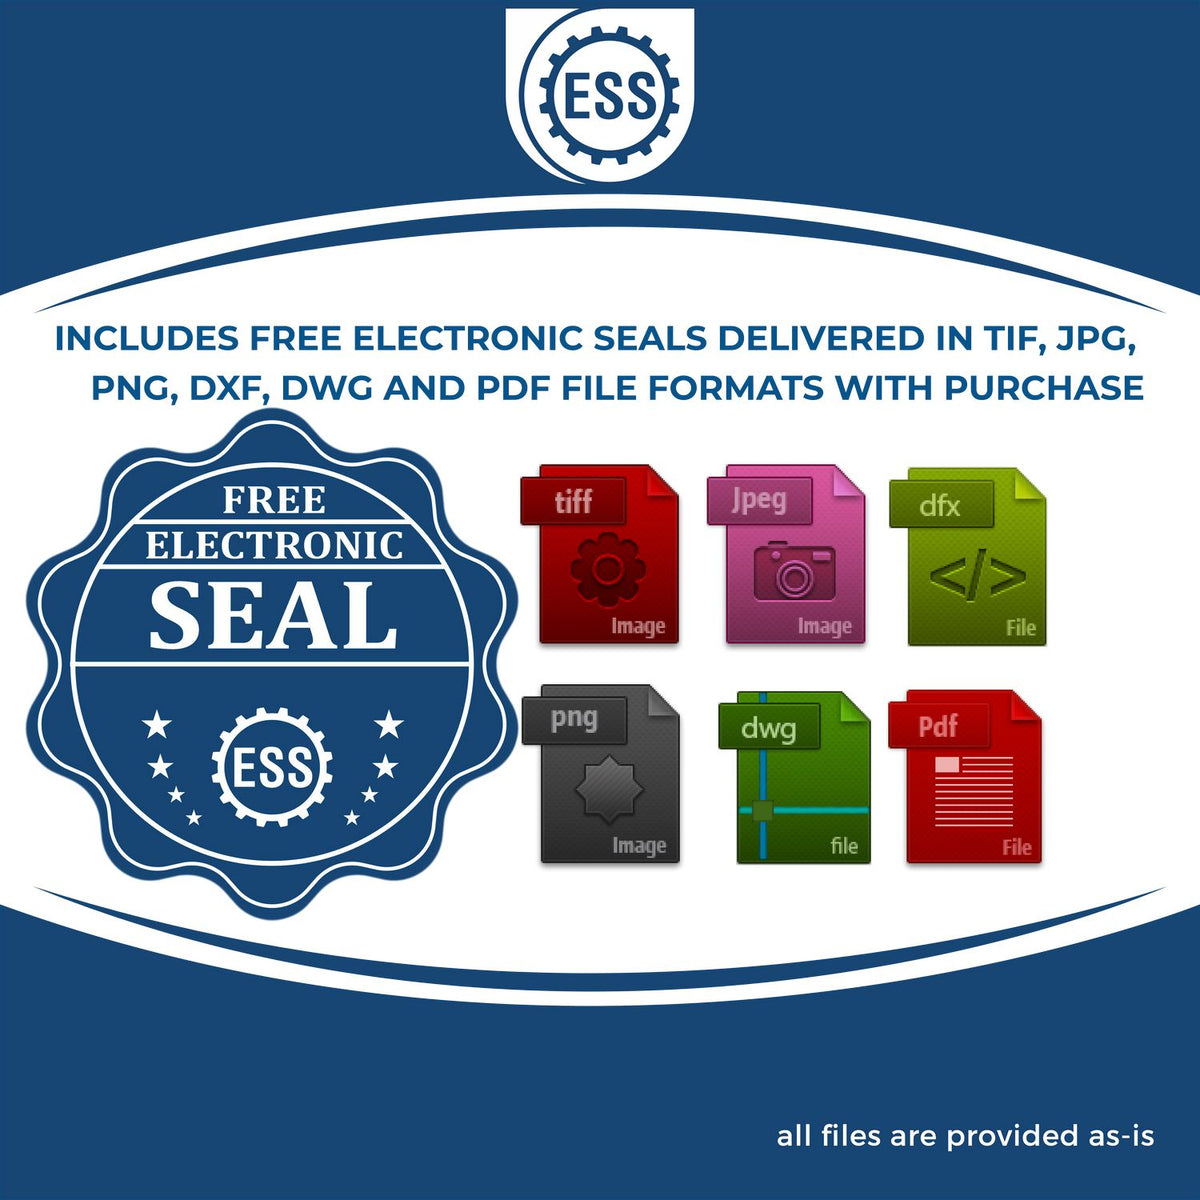 An infographic for the free electronic seal for the Heavy Duty Cast Iron Tennessee Architect Embosser illustrating the different file type icons such as DXF, DWG, TIF, JPG and PNG.